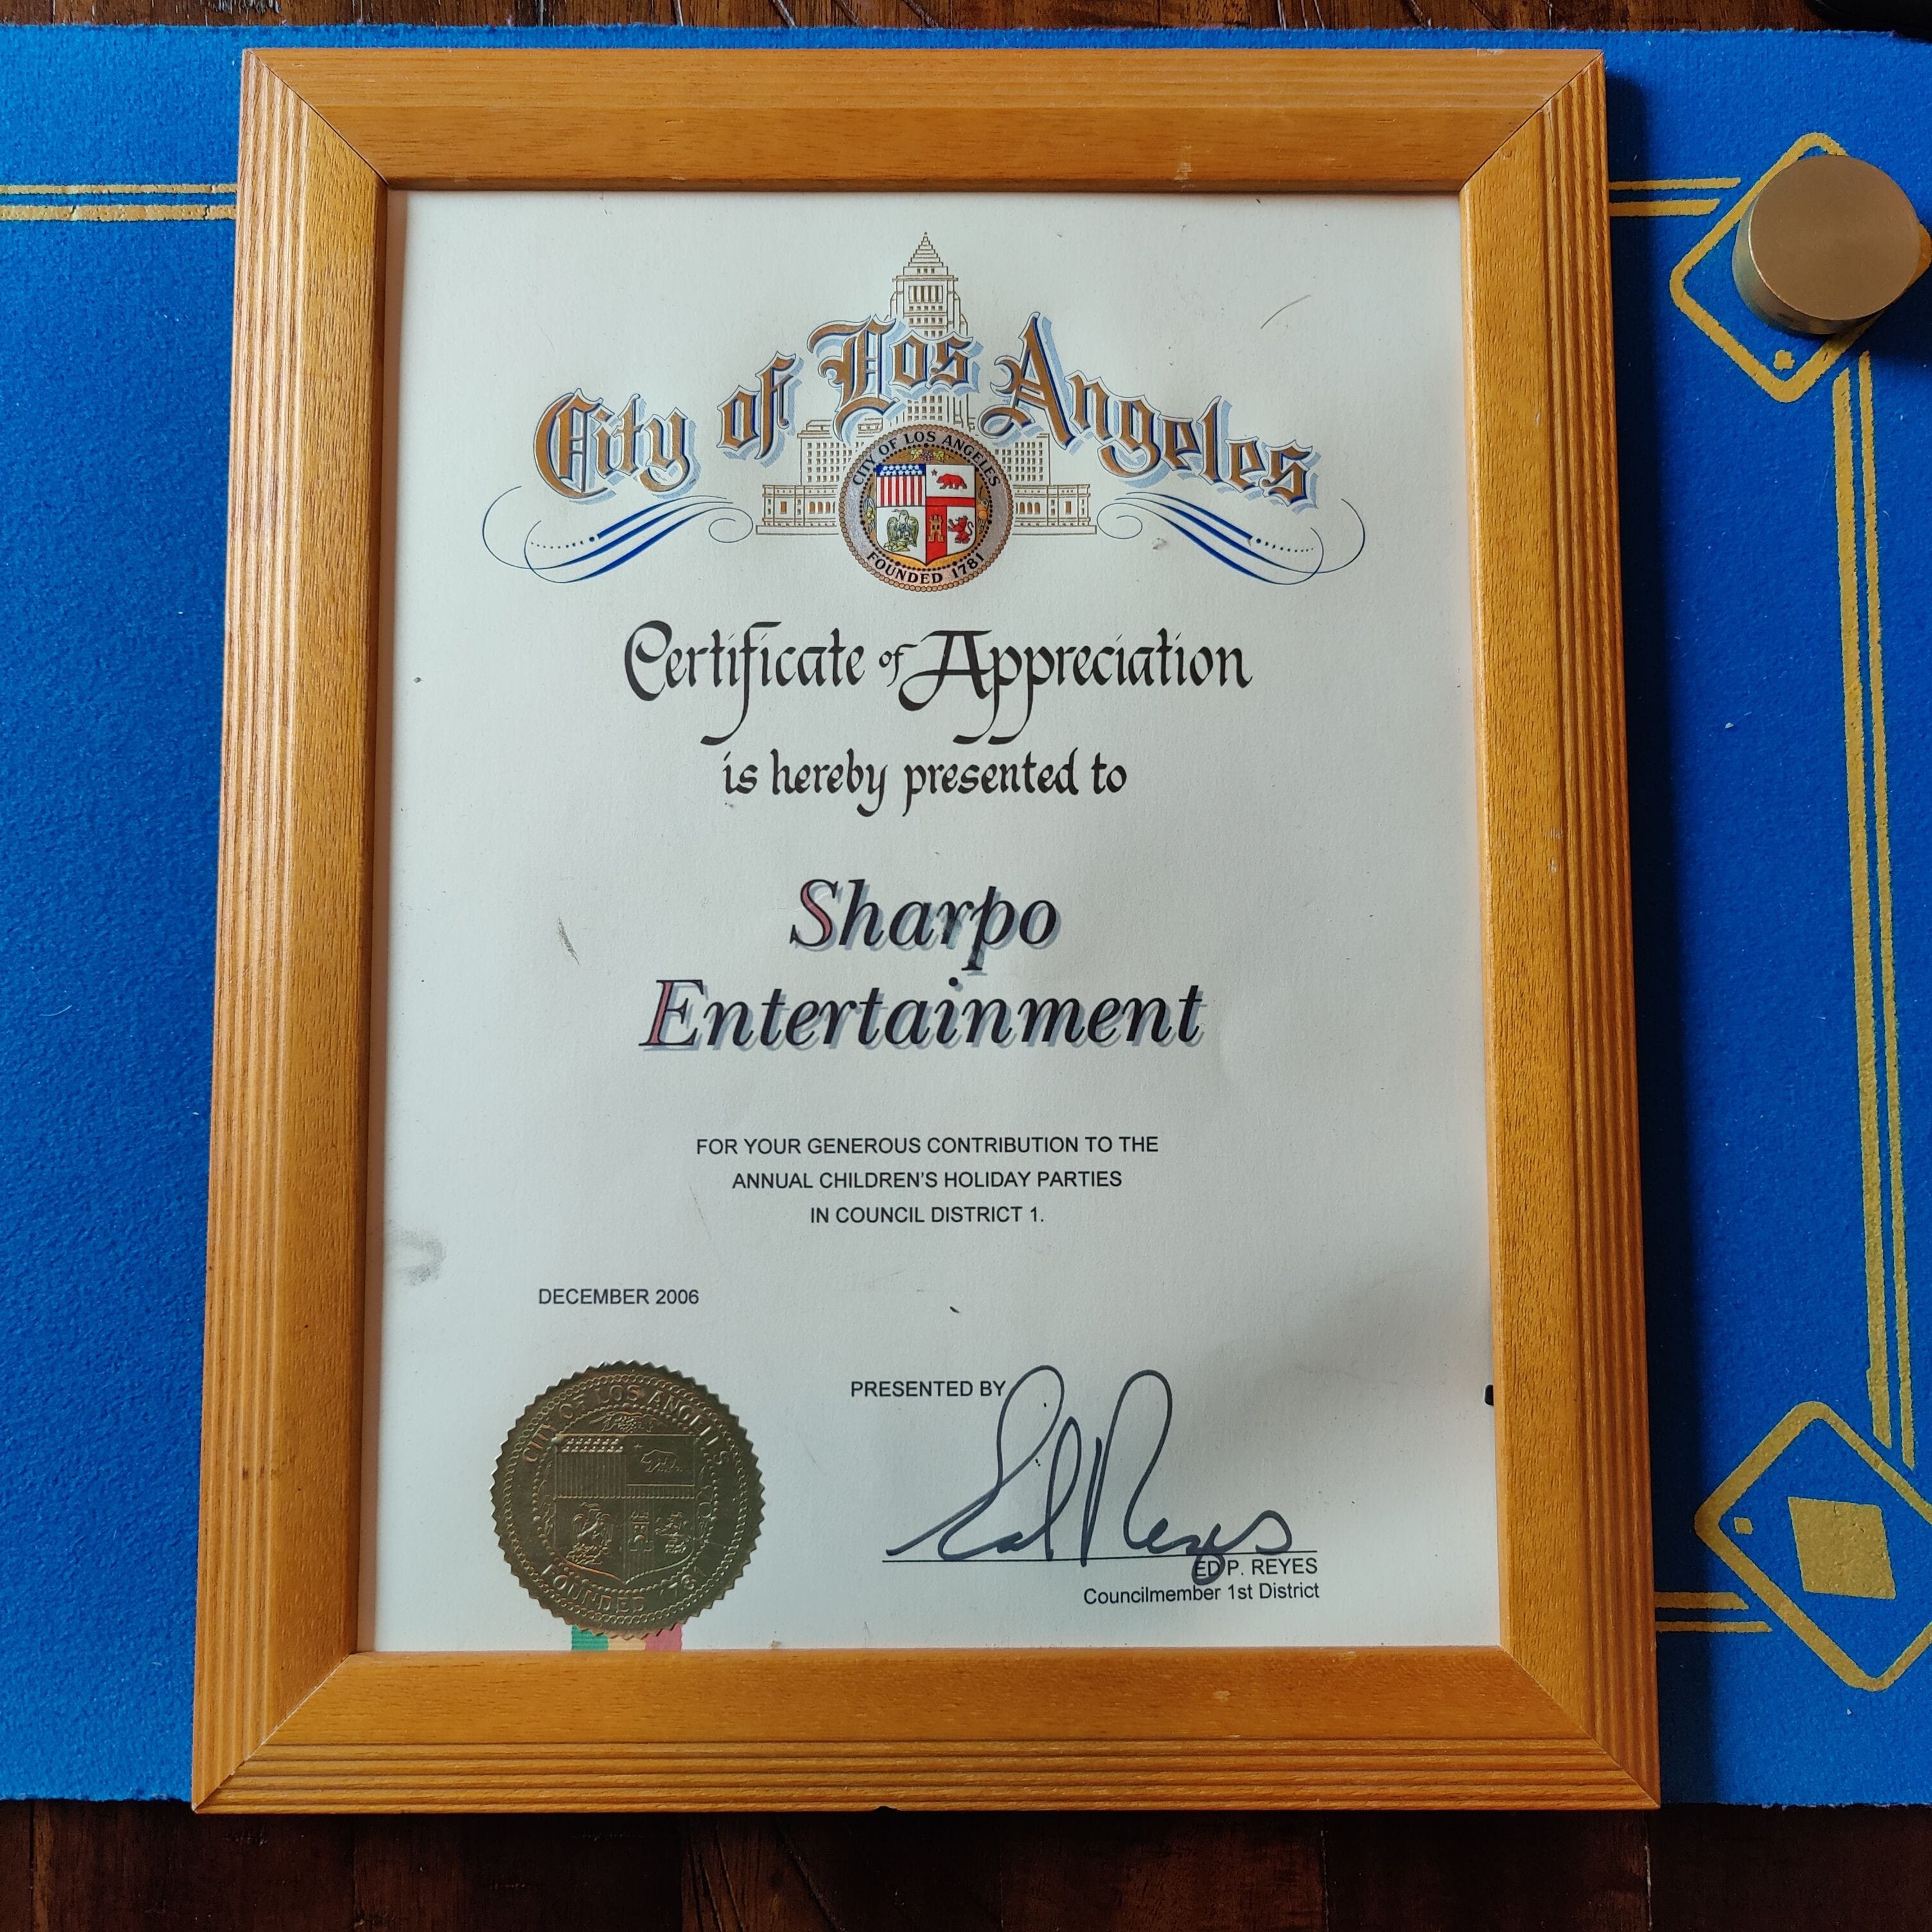 Certificate of Appreciation from the City of Los Angeles 2006 for charity children's magic show performance.